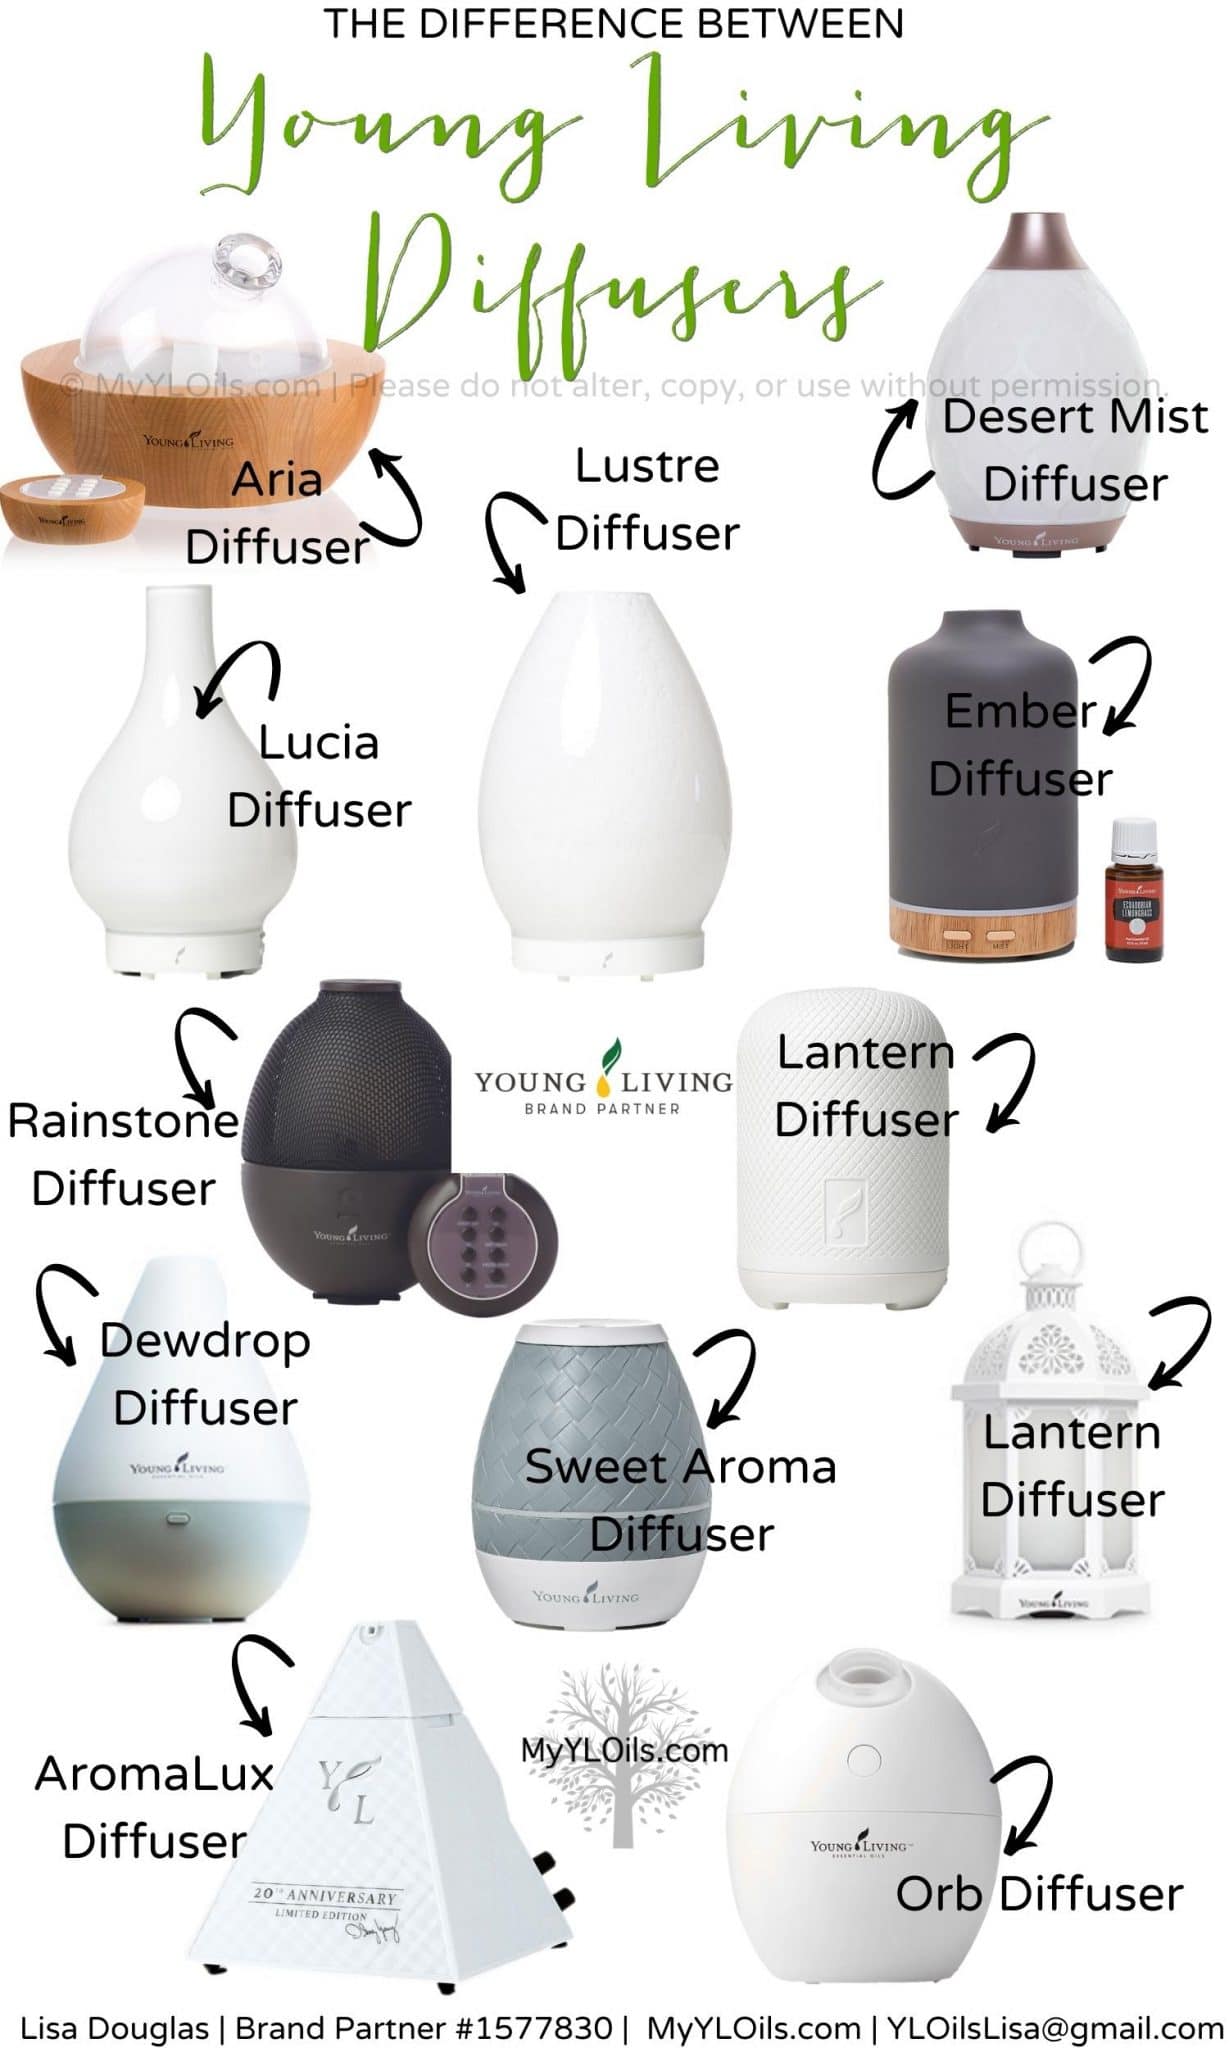 Ember diffuser young living